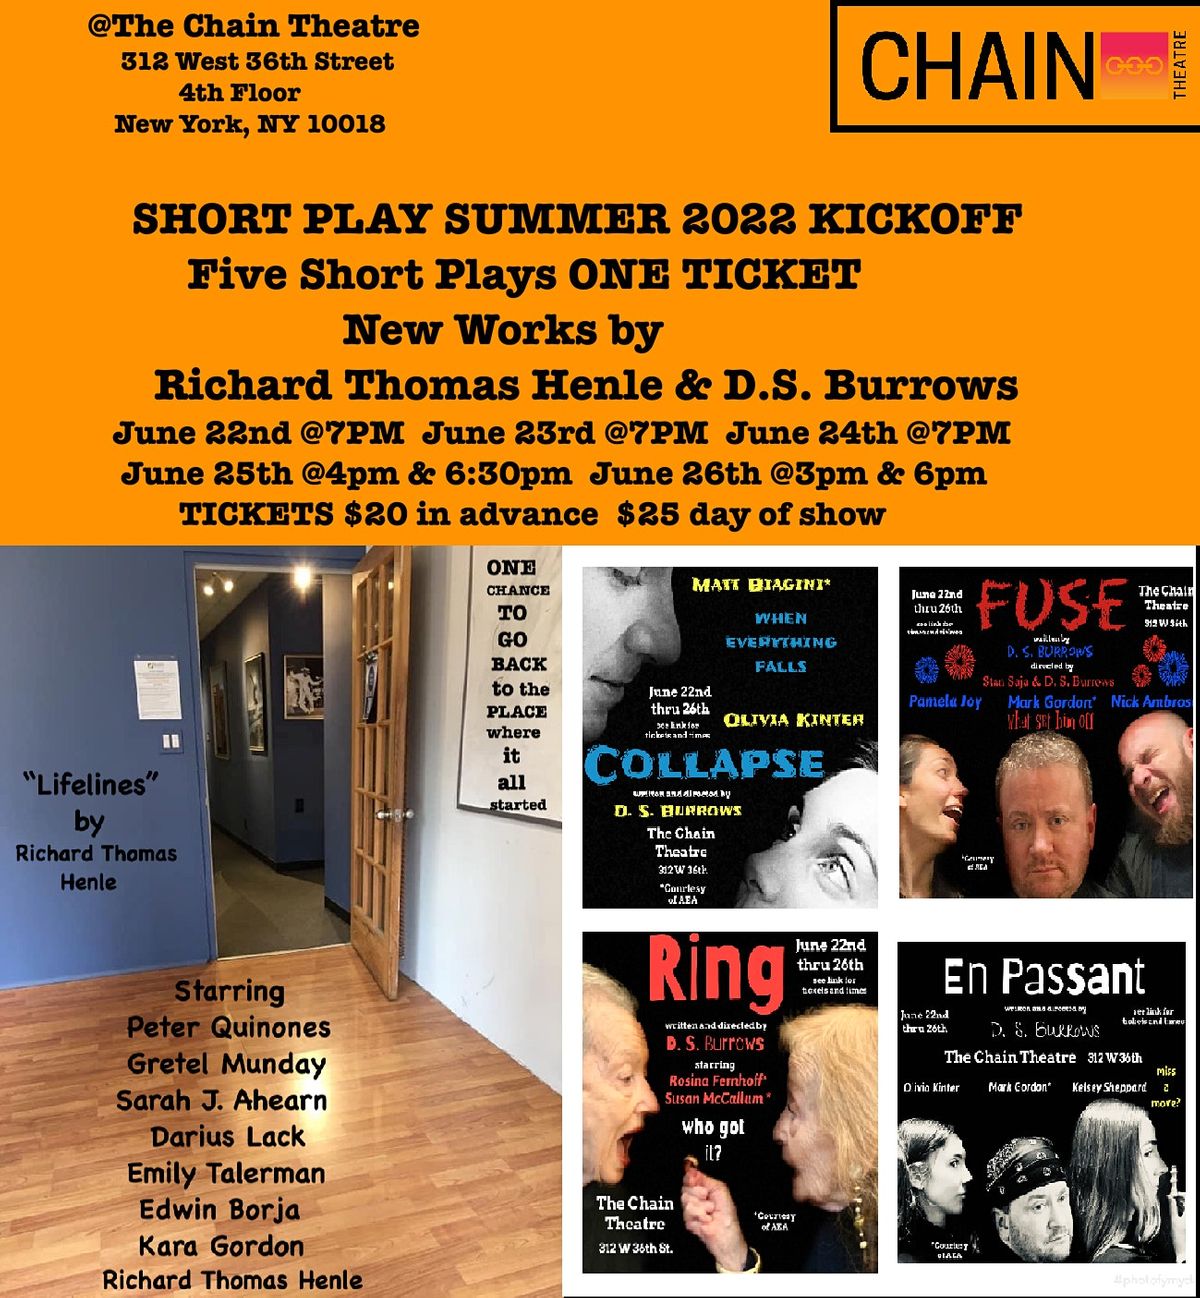 Summer 2022 Kickoff. Five New Plays ONE TICKET, Chain Theatre, New York